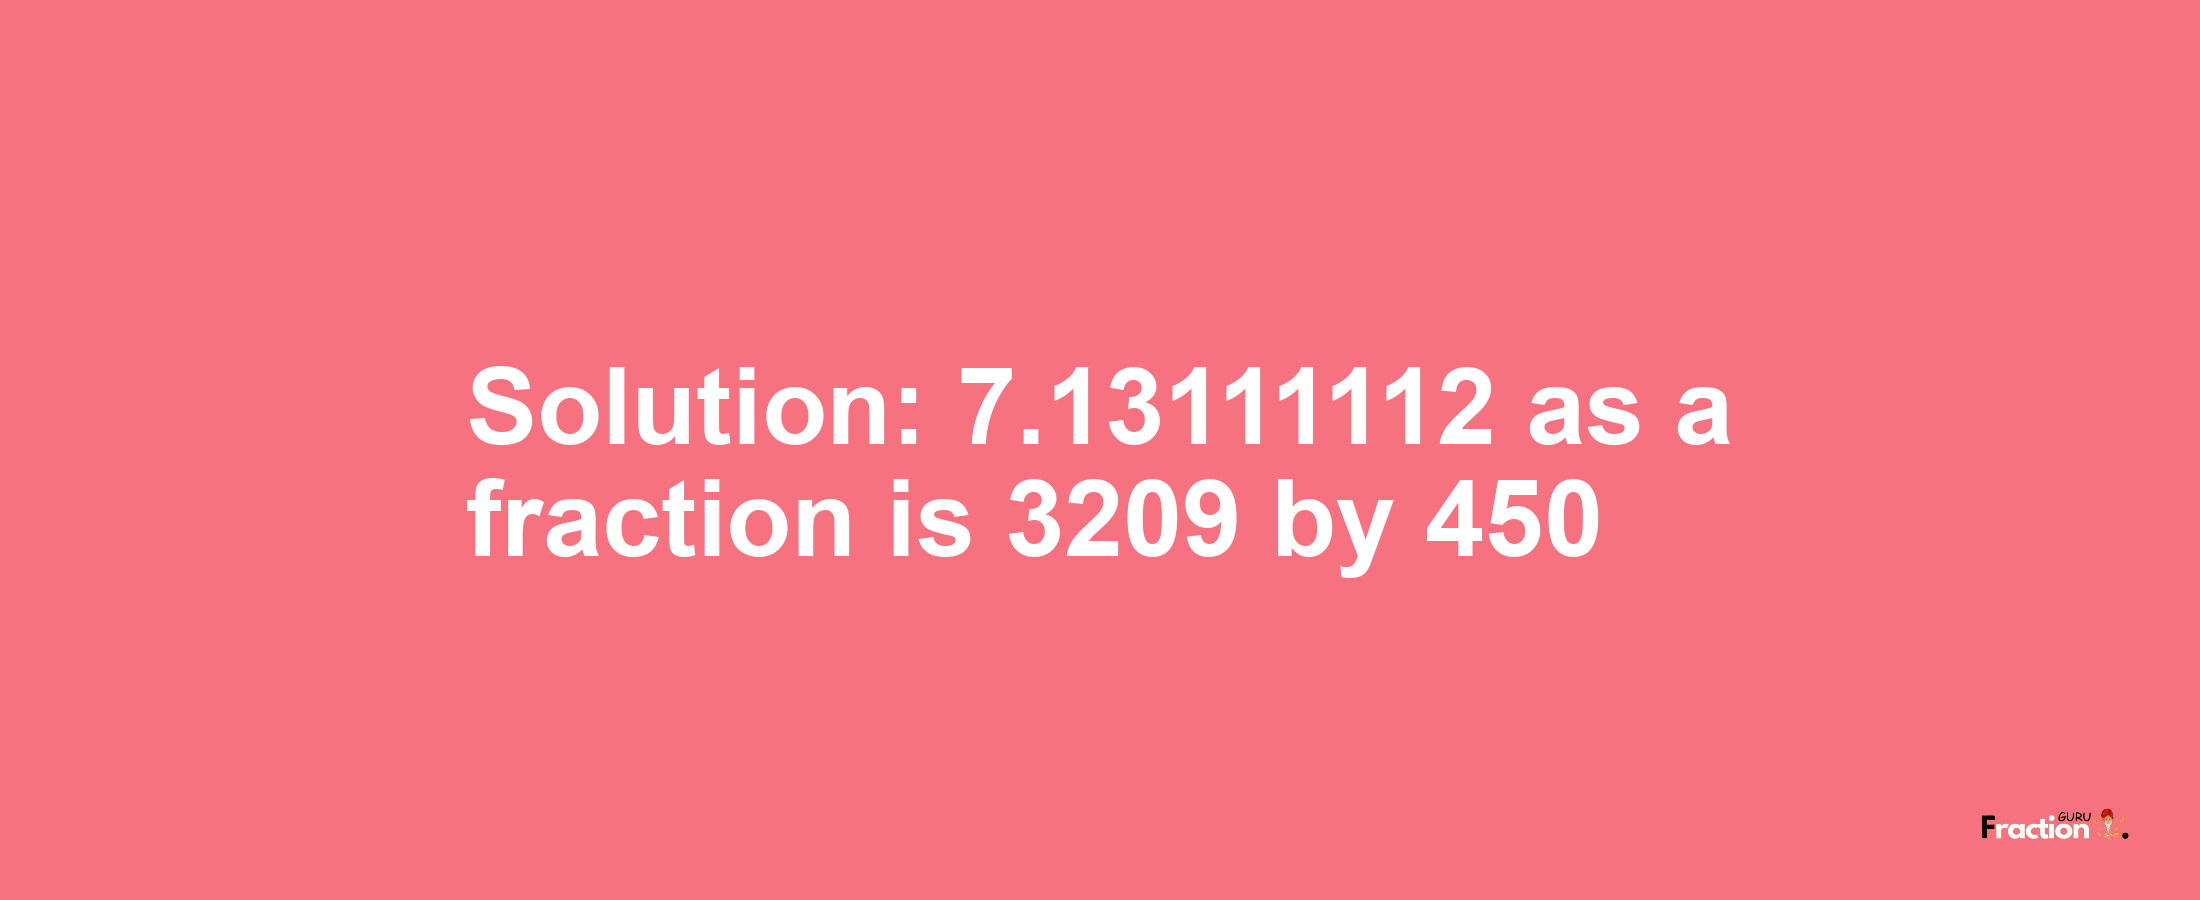 Solution:7.13111112 as a fraction is 3209/450